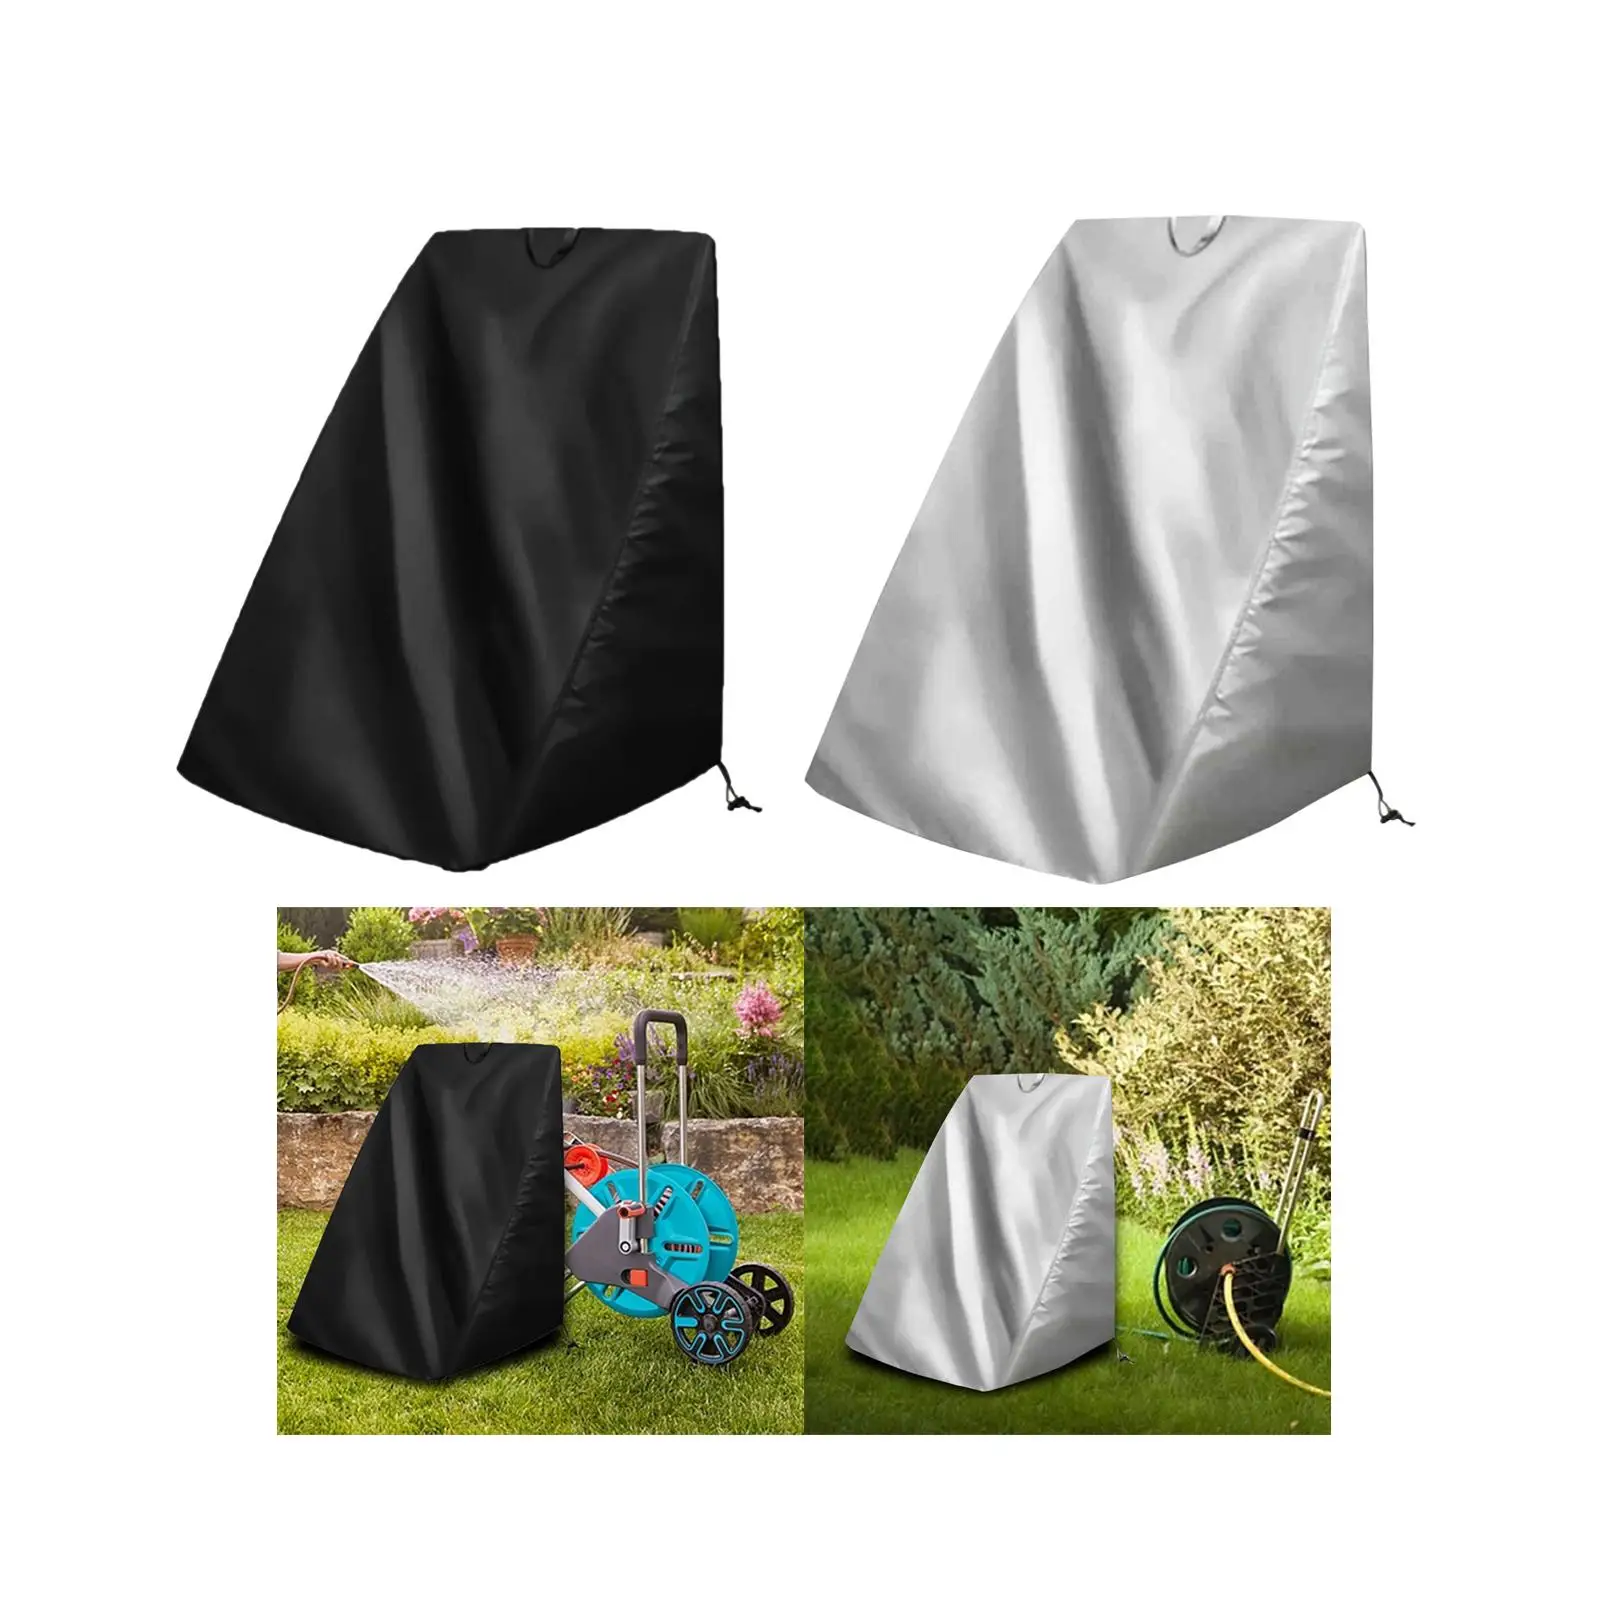 Hose Reel Cover Accessories Rain Cover Hose Cart Protector for Rewind Hose Storage Rack Hose Reel Holder Water Pipe Holder Stand